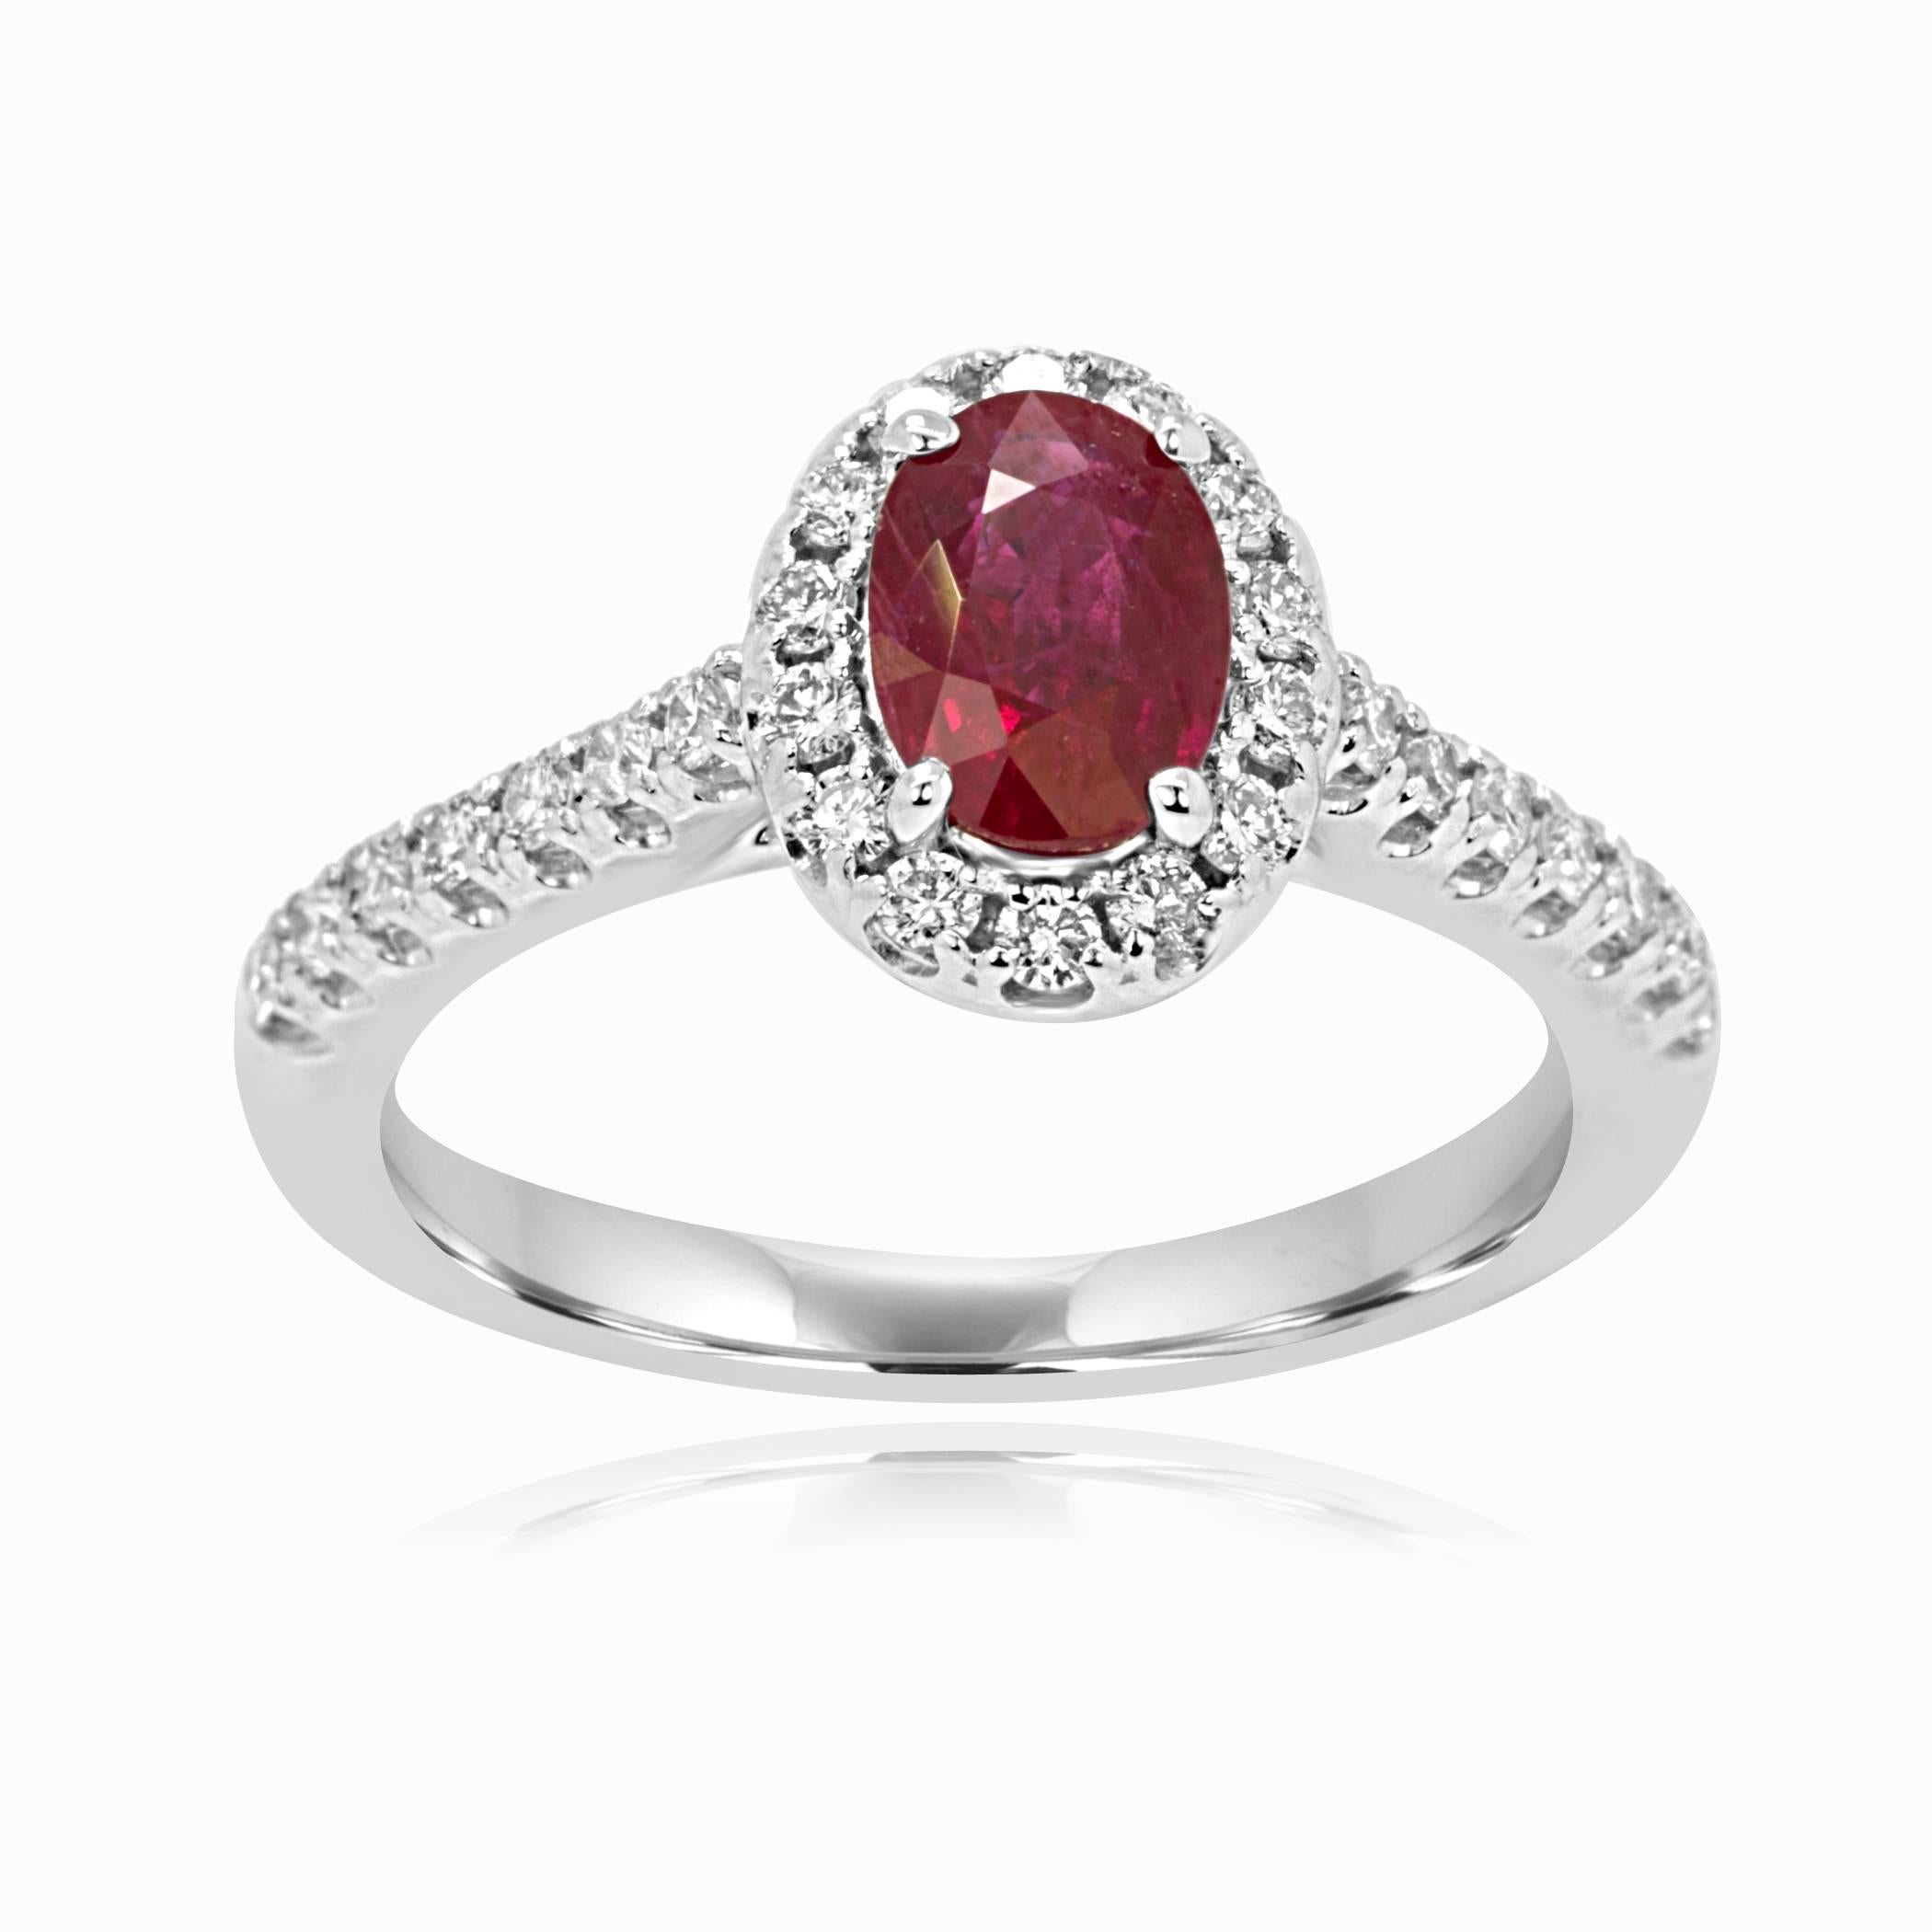 Ruby Oval 0.92 Carat encircled in a single halo of White Round Diamonds 0.38 Carat in a Classic ring 14K White Gold.

Style available in different price ranges. Prices are based on your selection of 4C's Cut, Color, Carat, Clarity. Please contact us